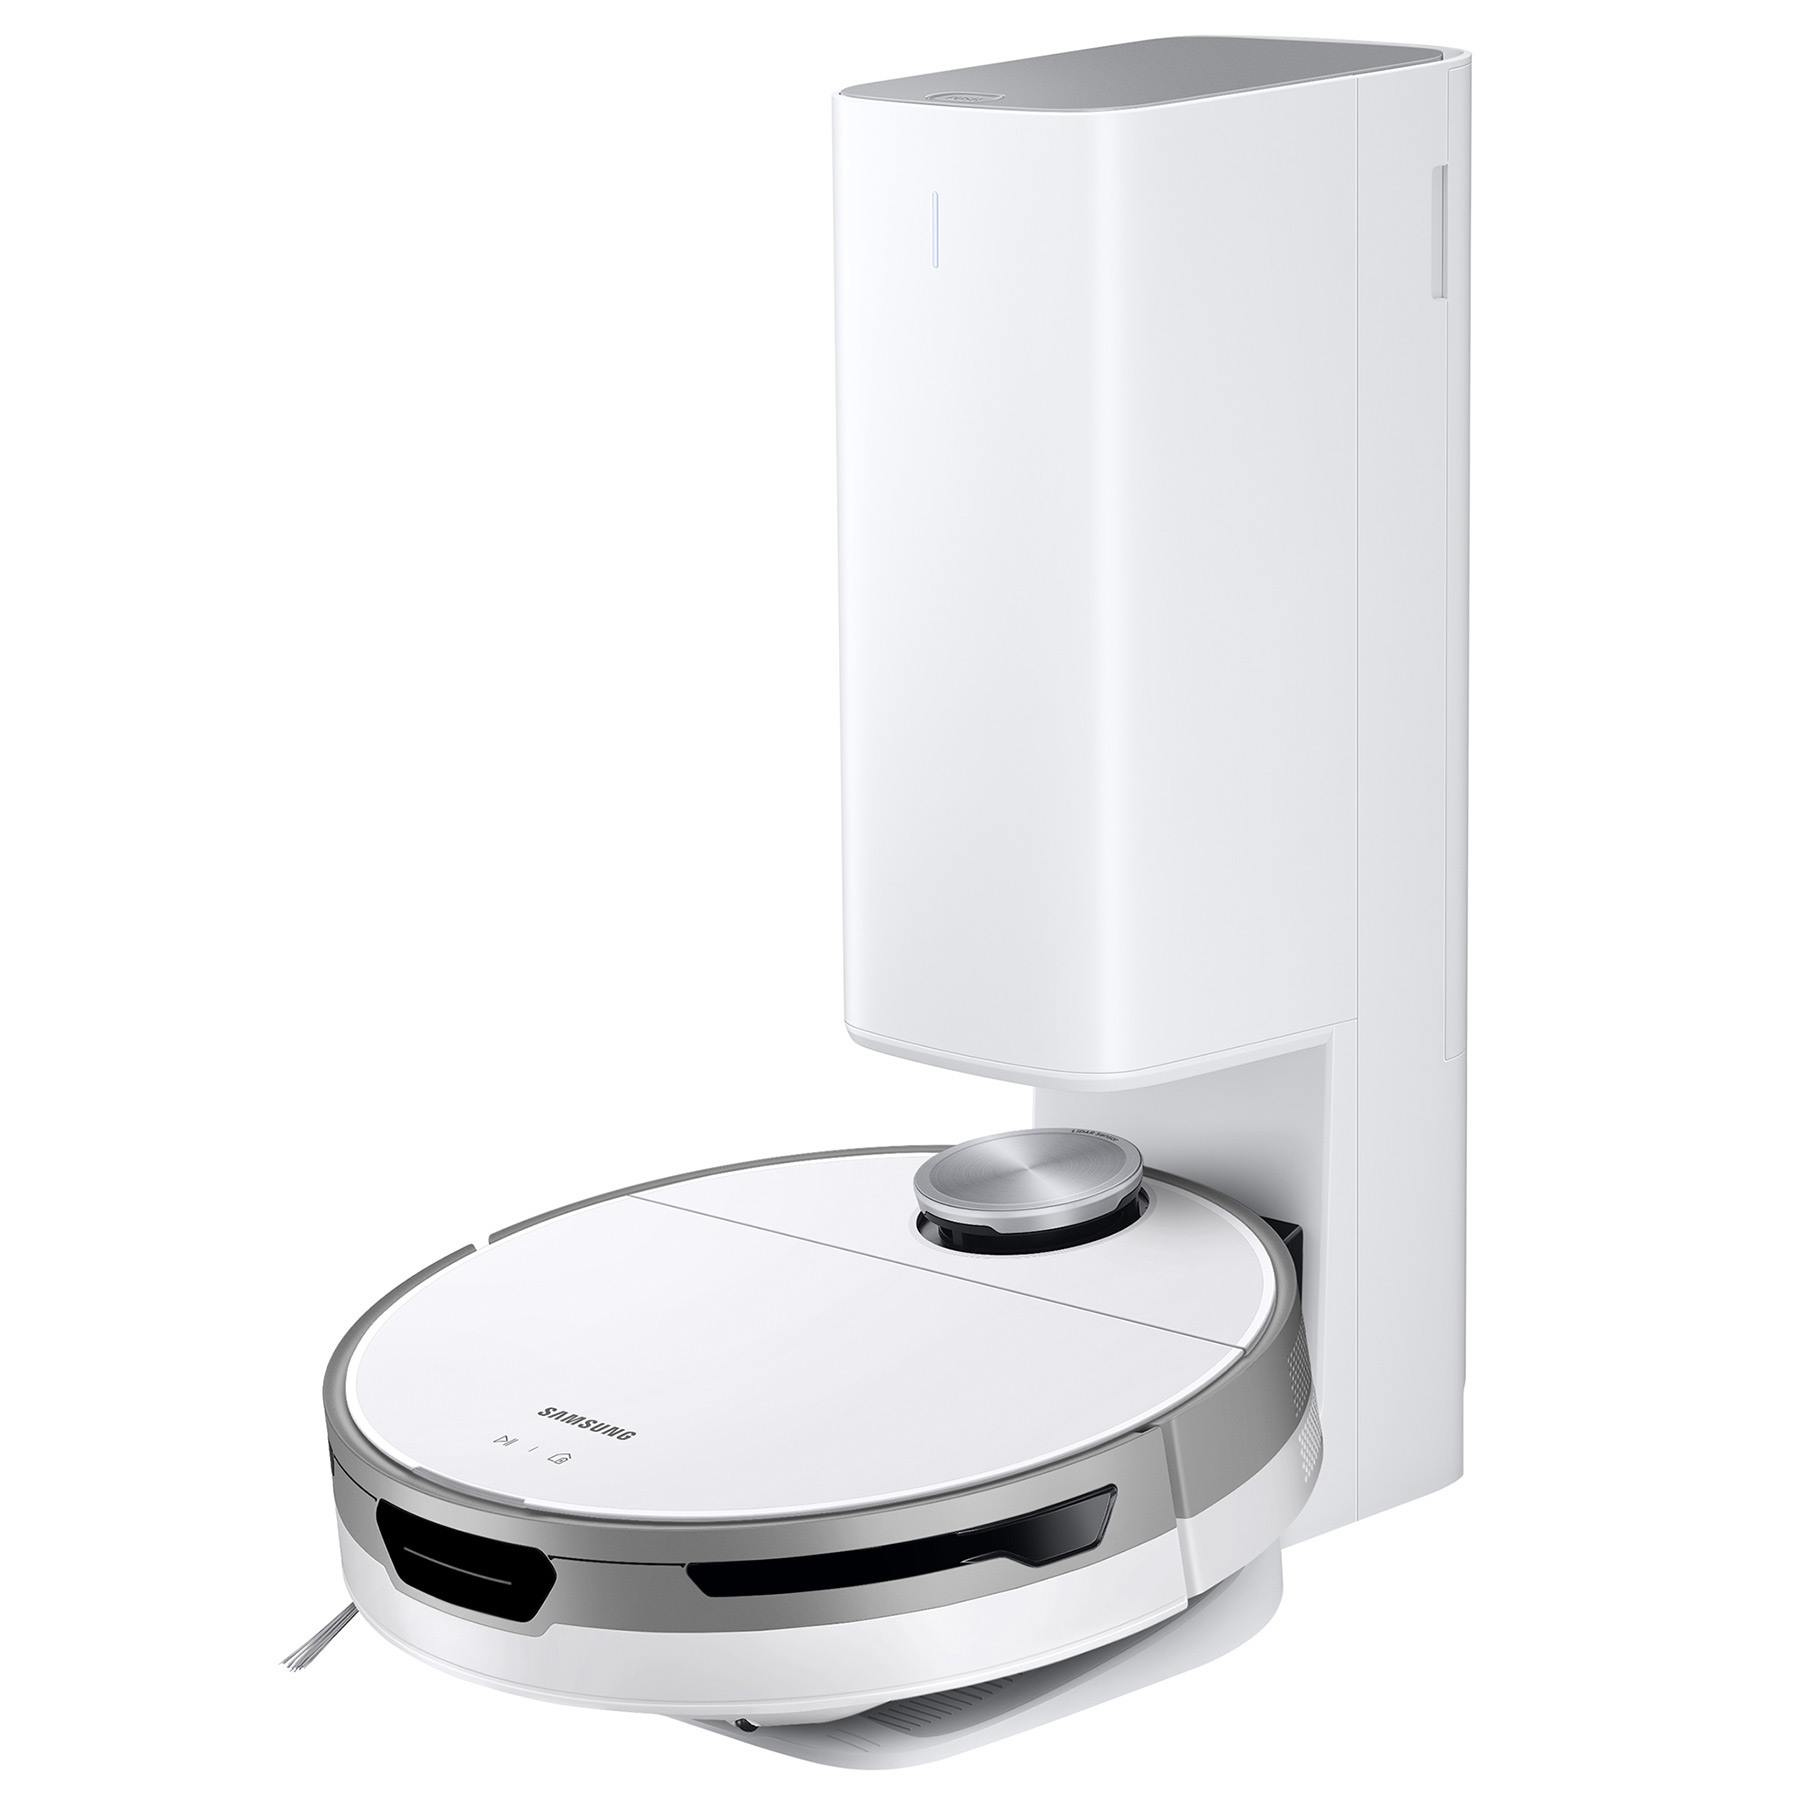 Image of Samsung VR30T85513W Jet Bot Cleaning Robot in White with Clean Station